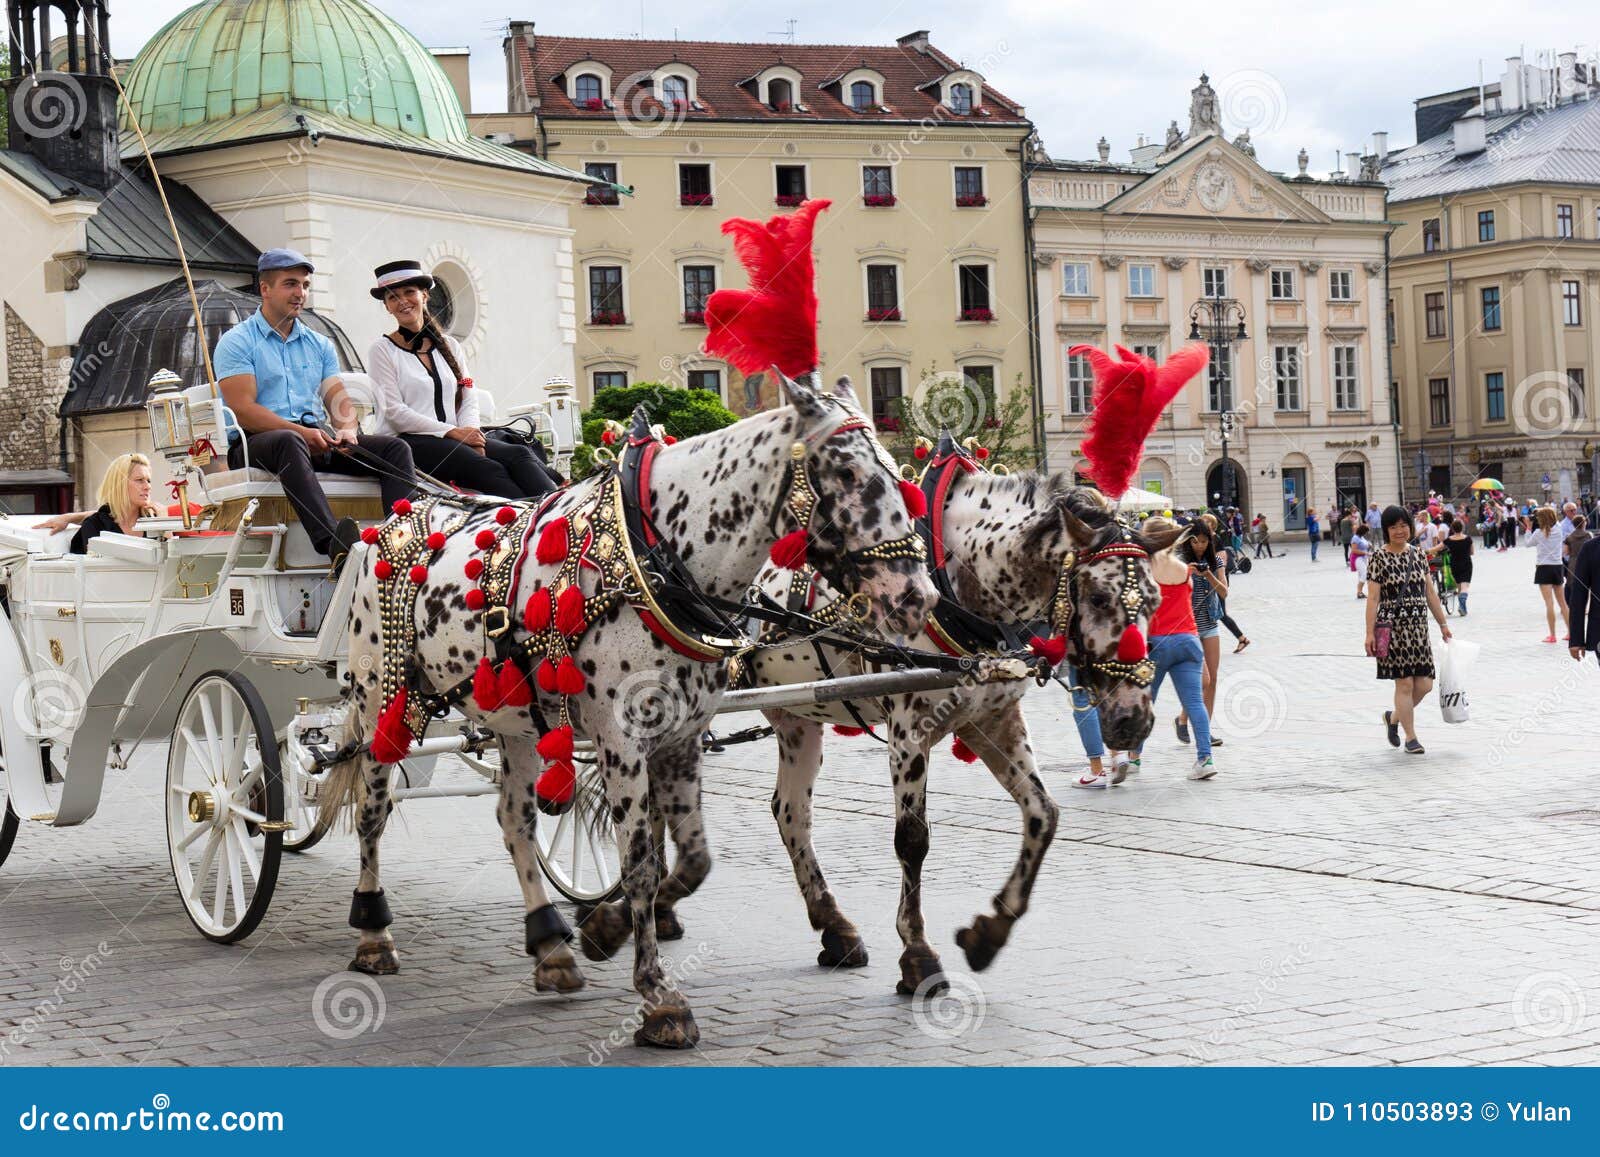 Krakow Horse And Carriage